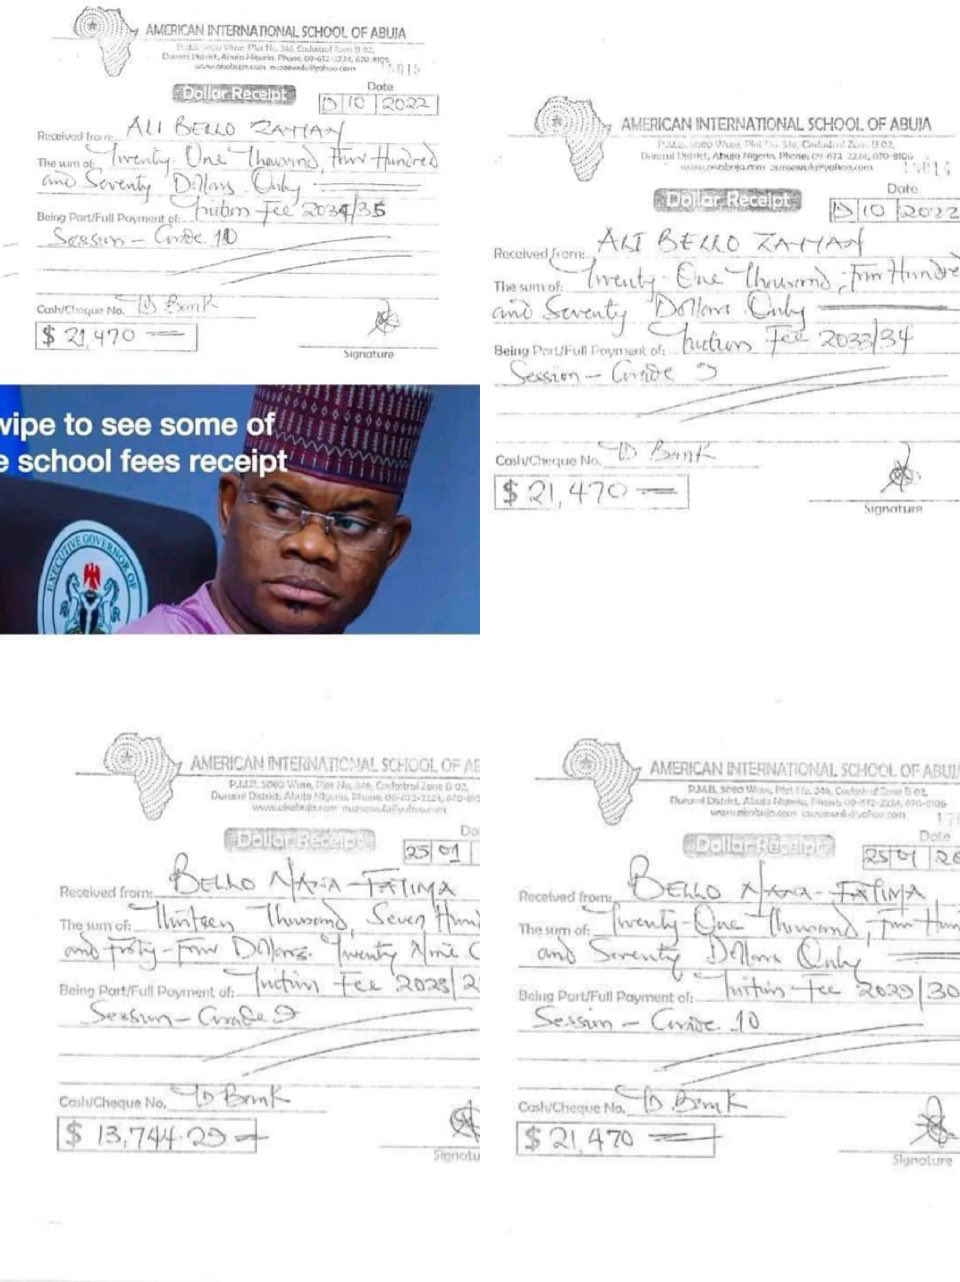 CHILDREN PHOTO Yahaya Bello paid 13744 and 21470 for daughters